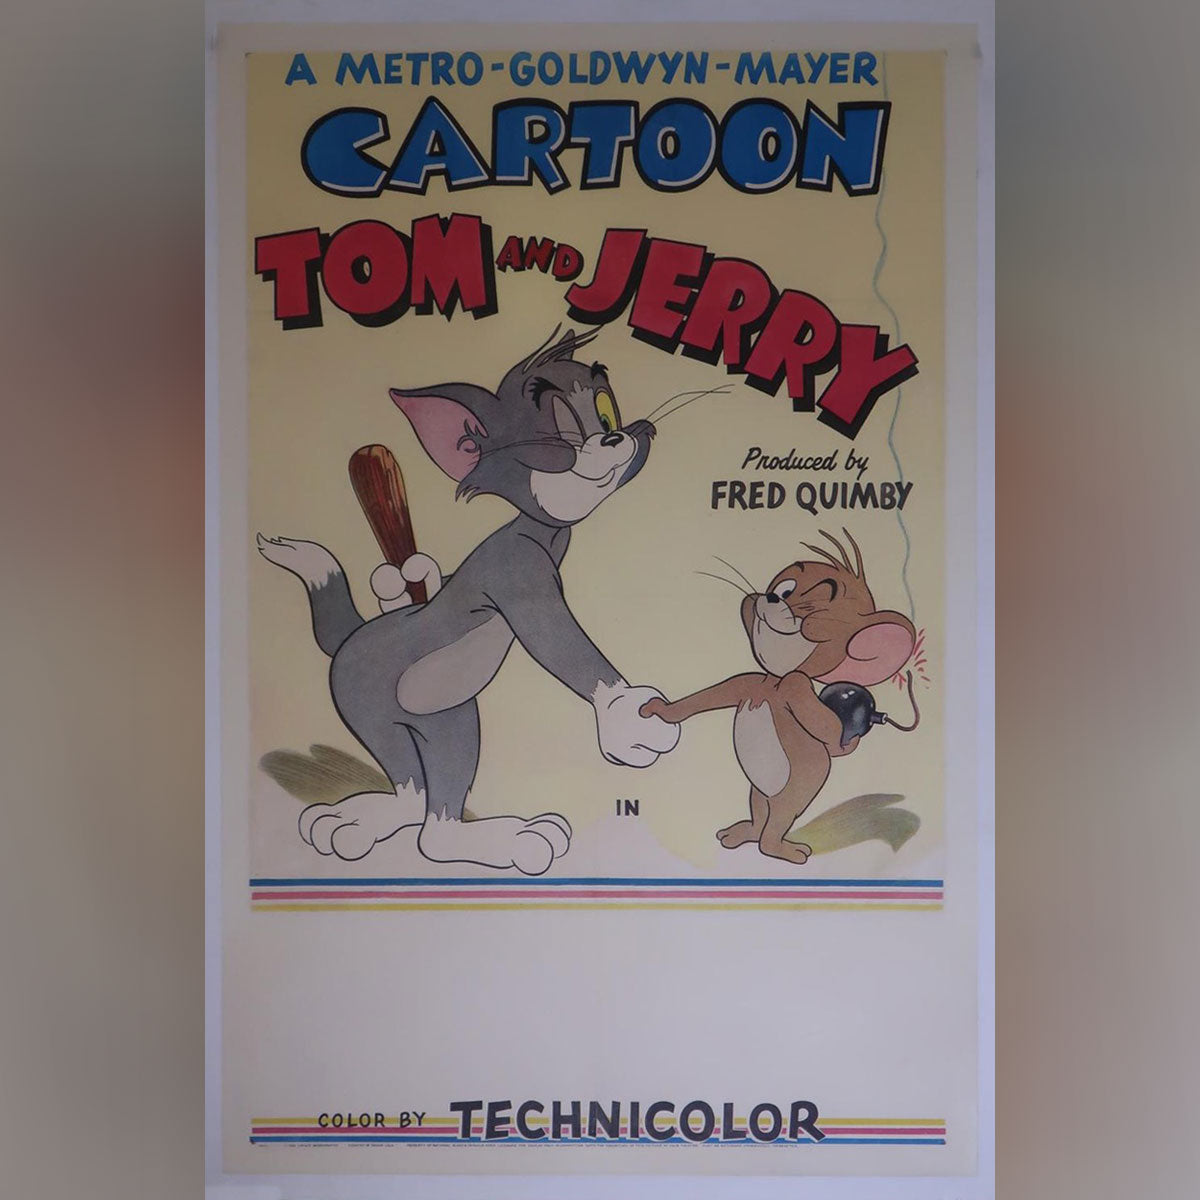 Tom and Jerry (1952)